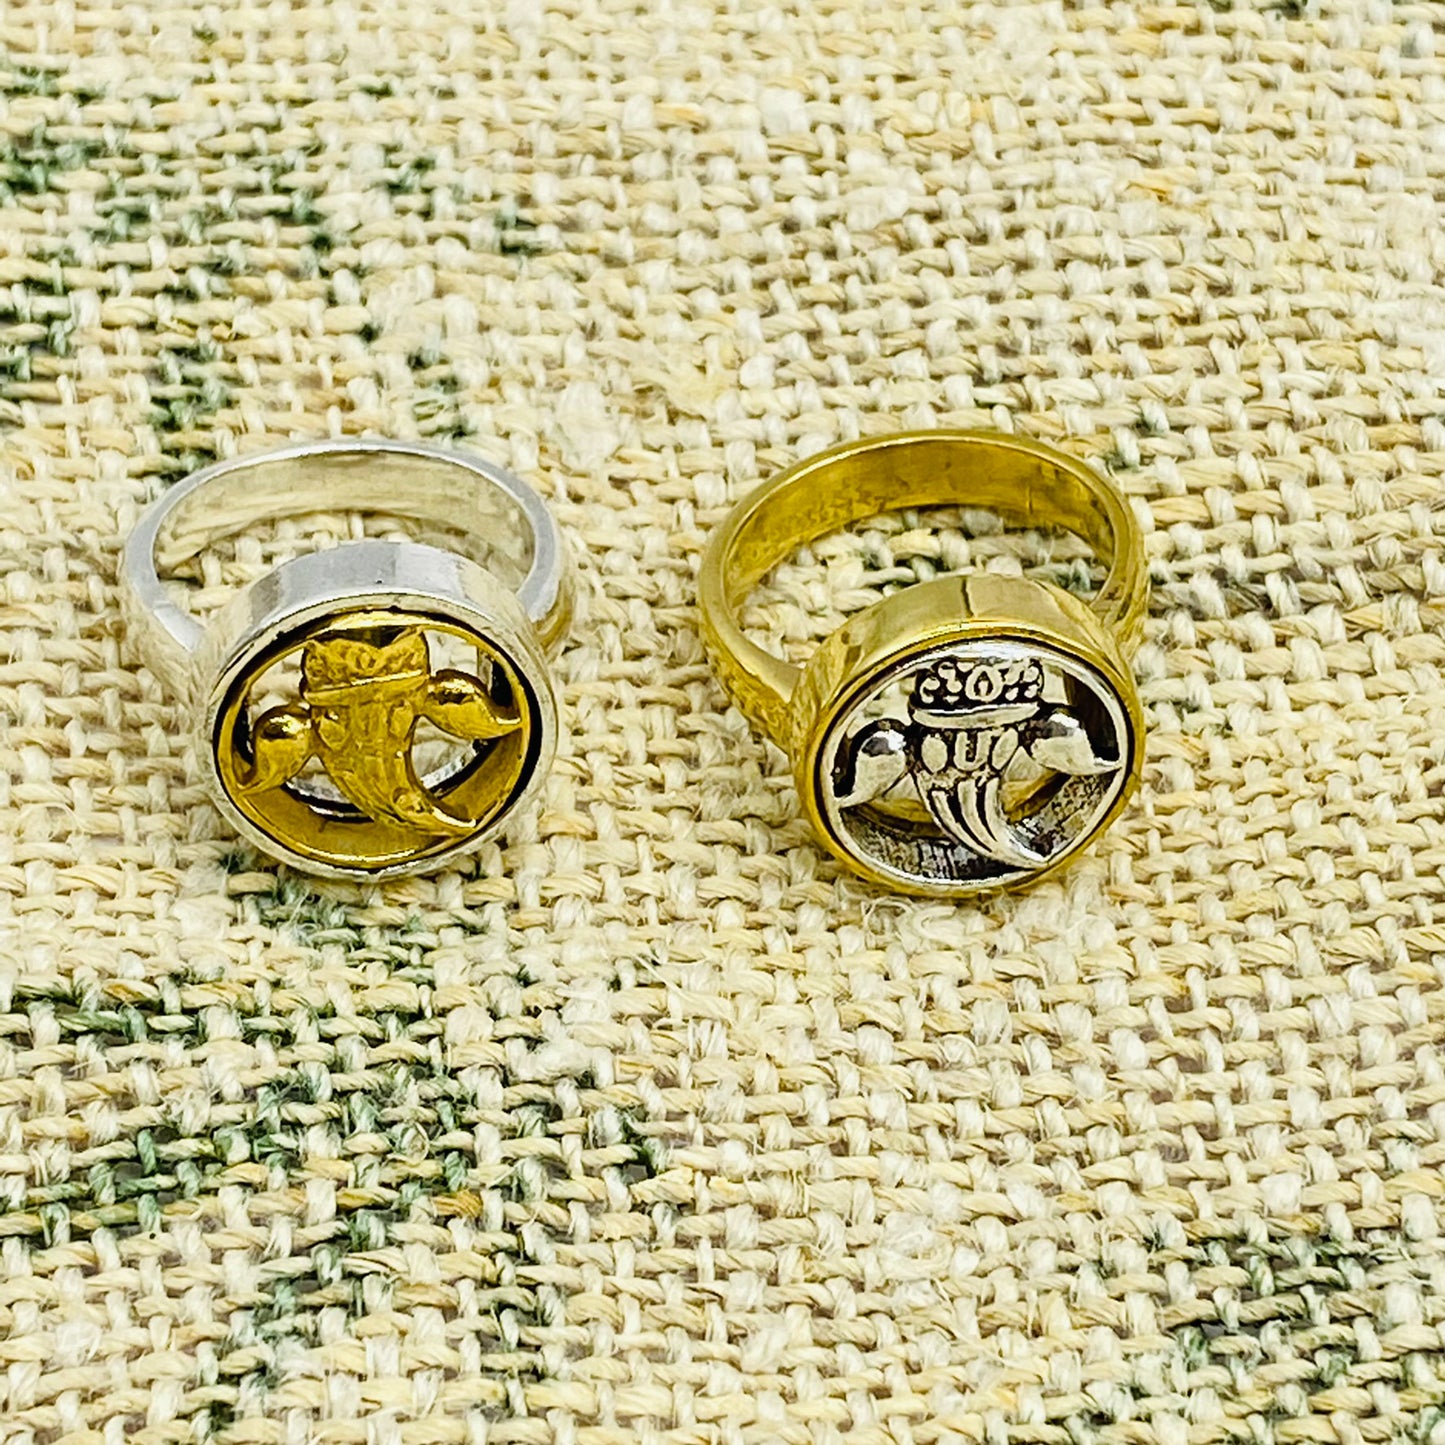 Ganesh Rings, Handmade Ganesa Jewelry, Good Luck Rings, Gold Filled Rings, Silver Bohemian Rings, Unisex Round Rings, Gypsy Jewelry